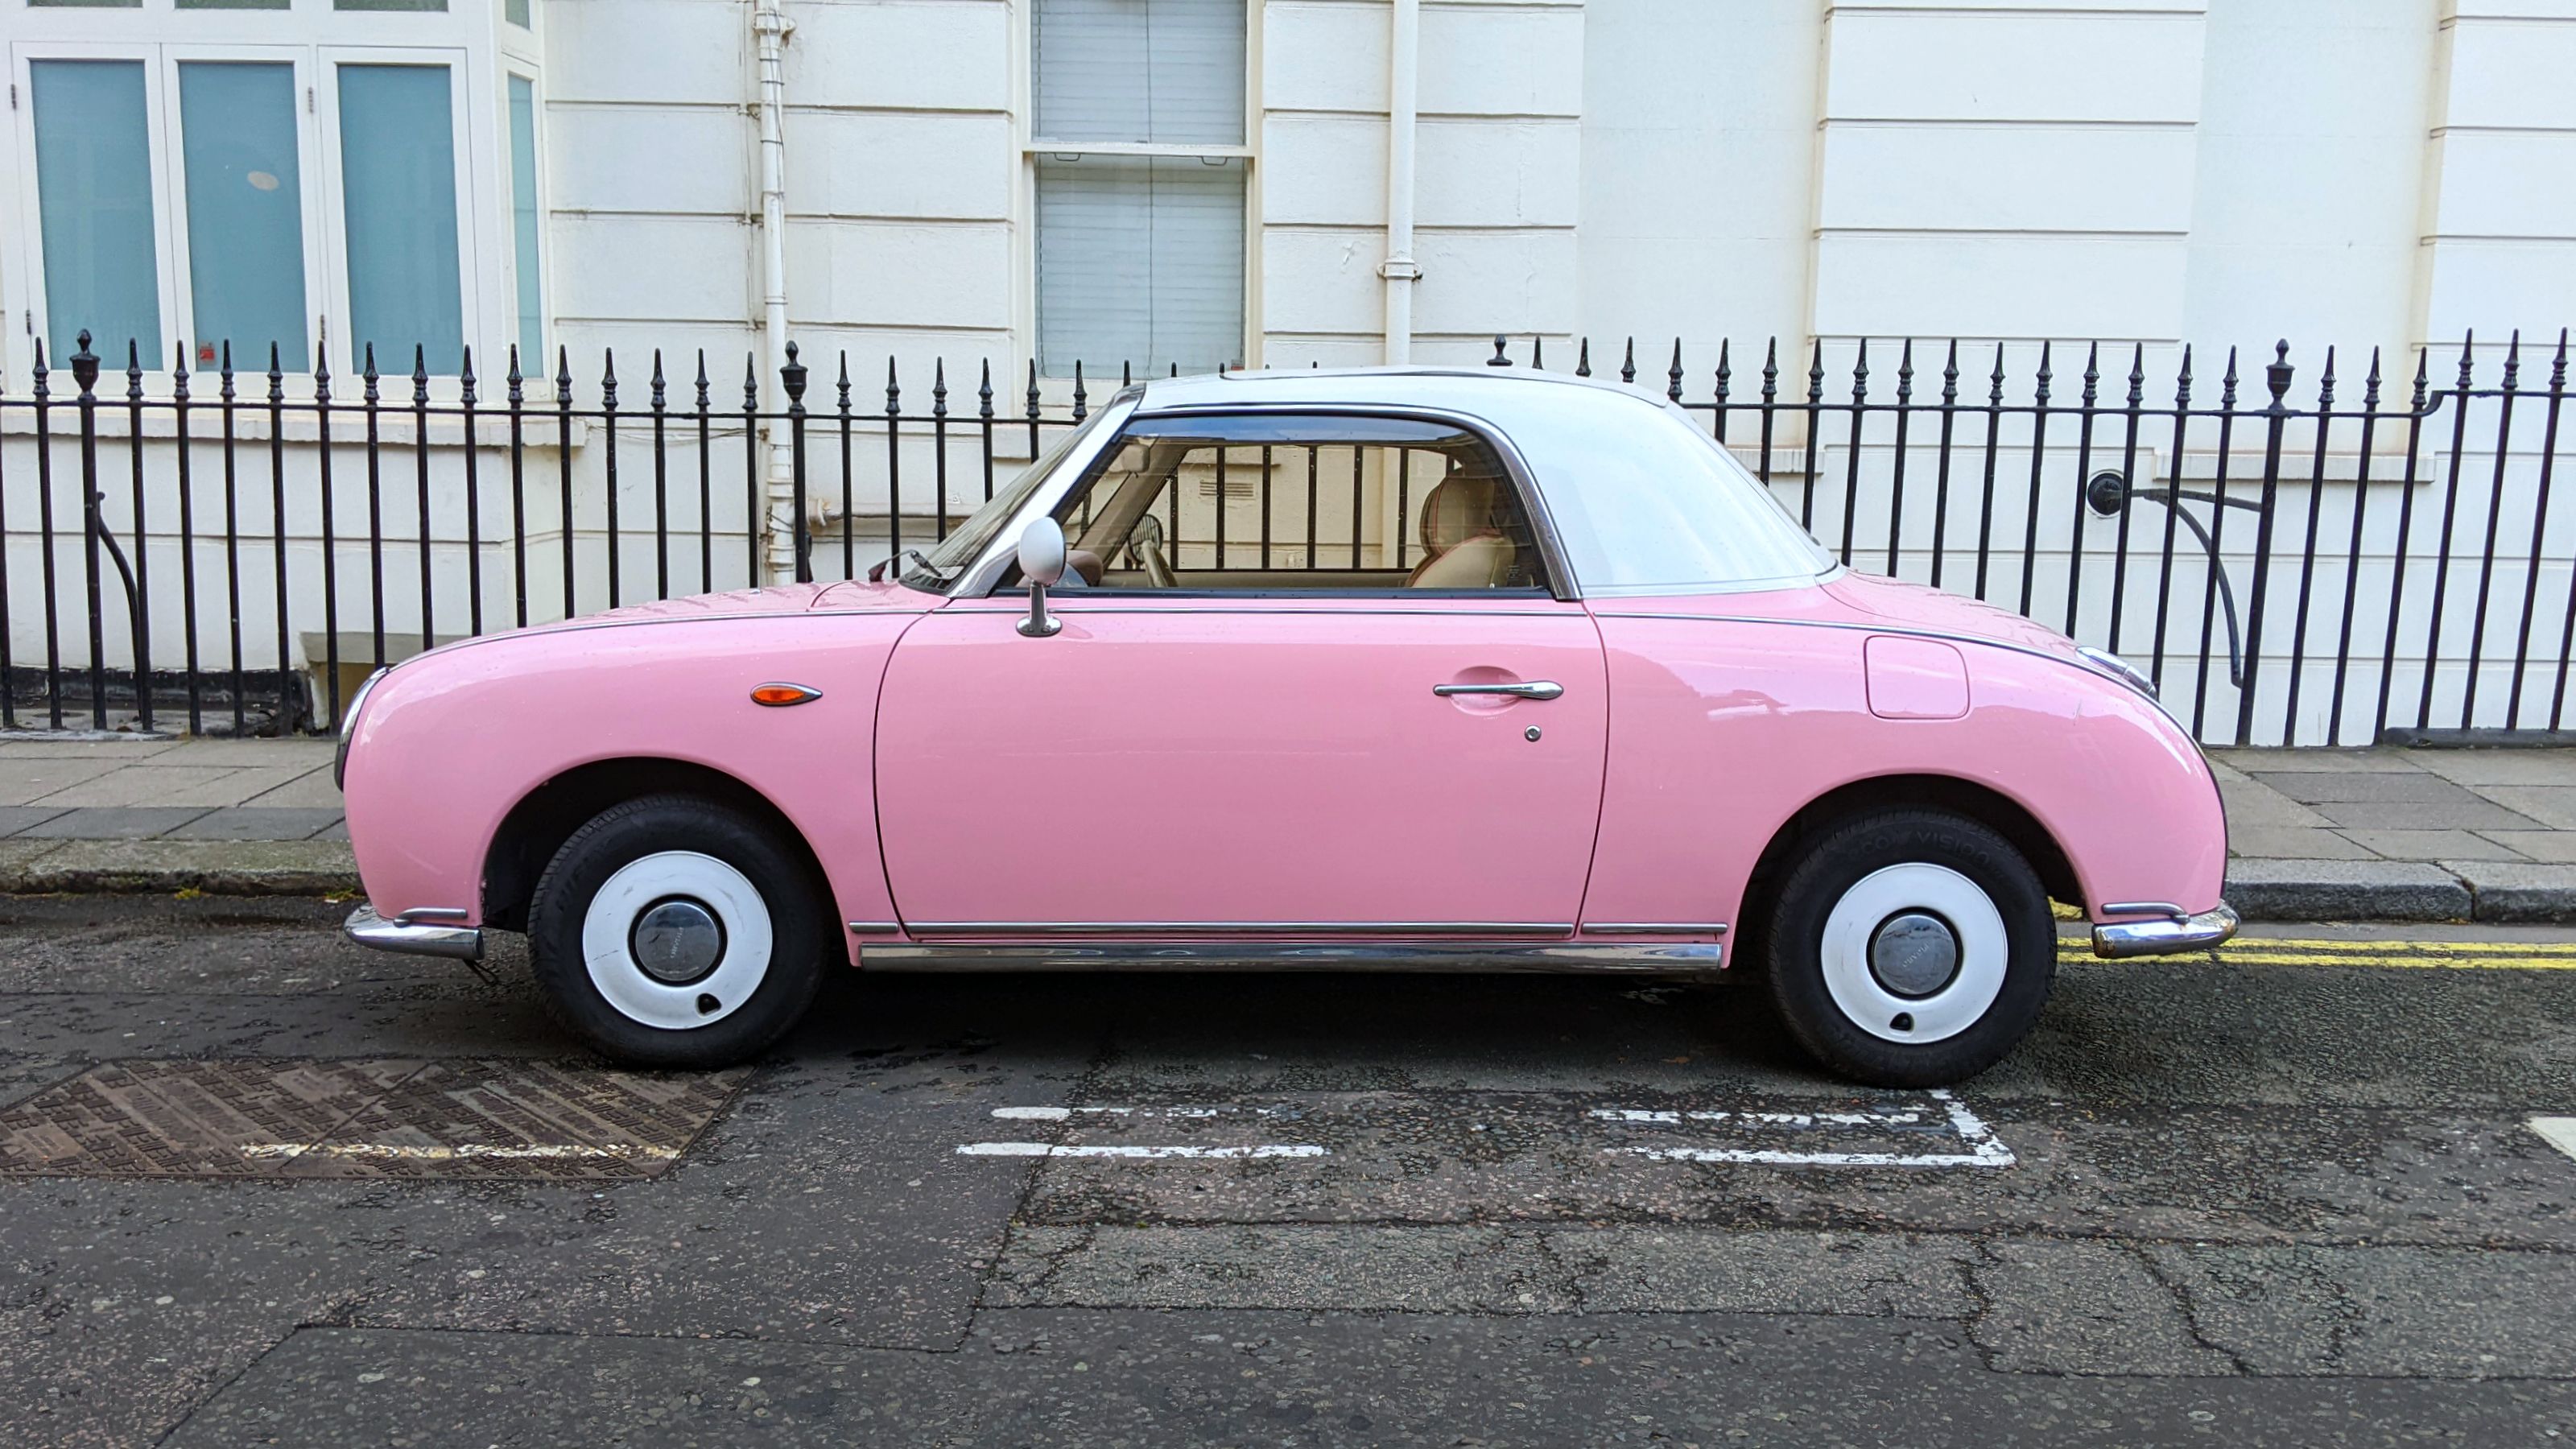 A classic style Nissan Figaro in pastel pink parked on a London street.